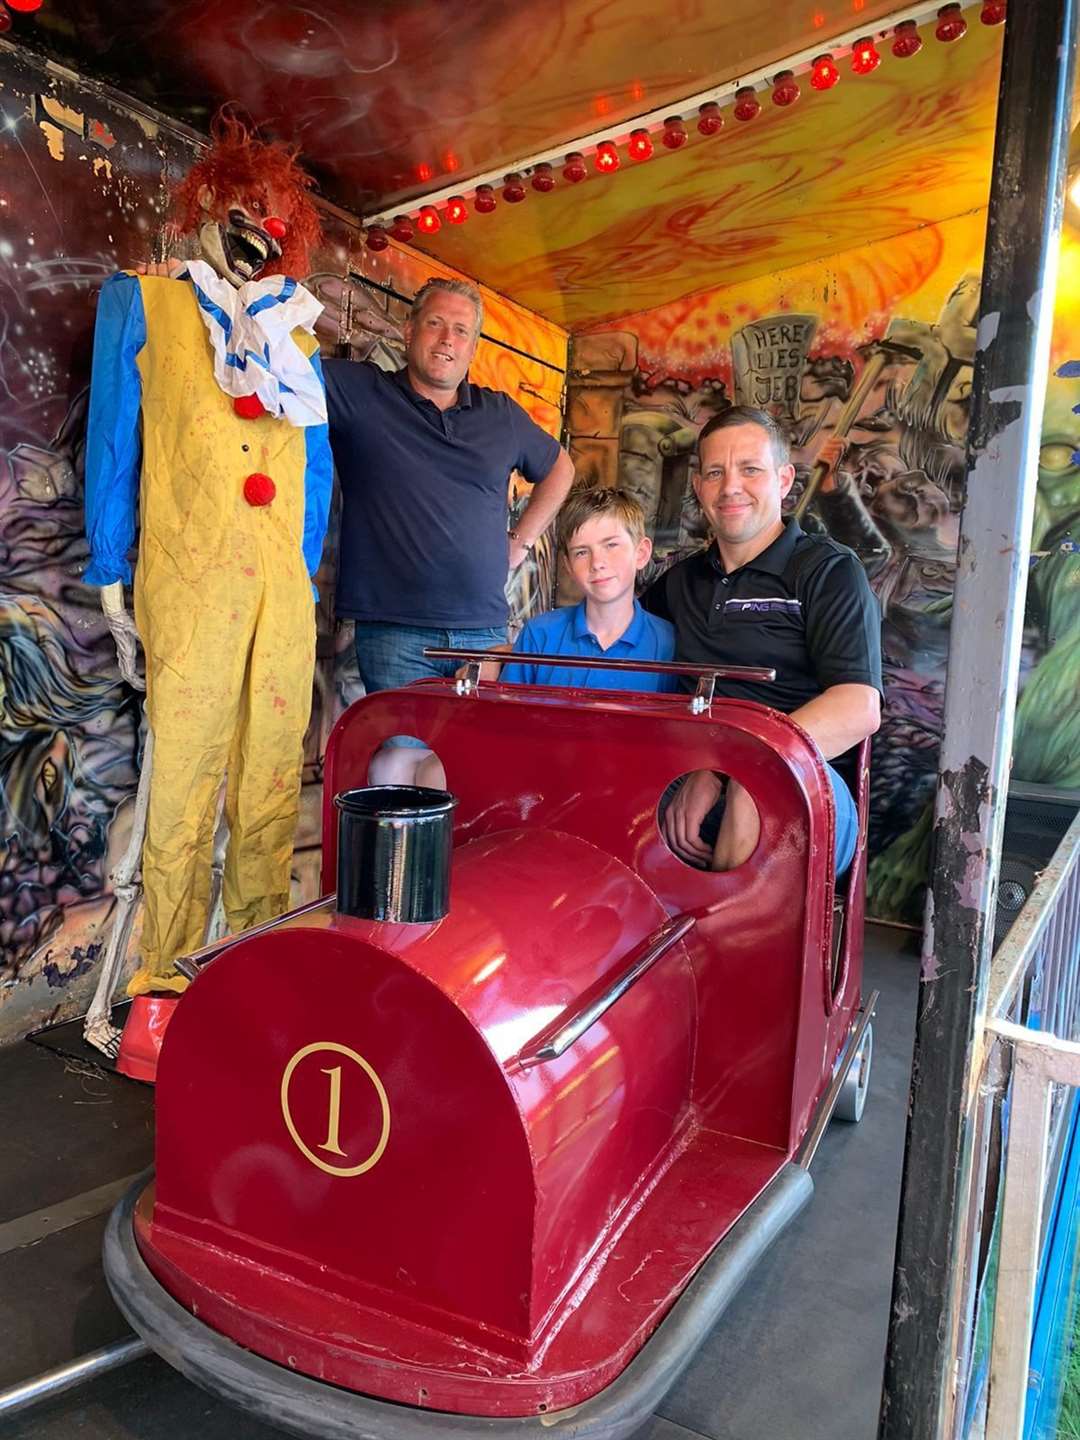 Skeleton staff: Reece Brett, right, pictured with his son Little Reece, and fairground boss Carlos Christian, are looking for a spooky person to join them on the Graveyard Express ghost train visiting Leysdown on the Isle of Sheppey. Picture: Jemma Christian